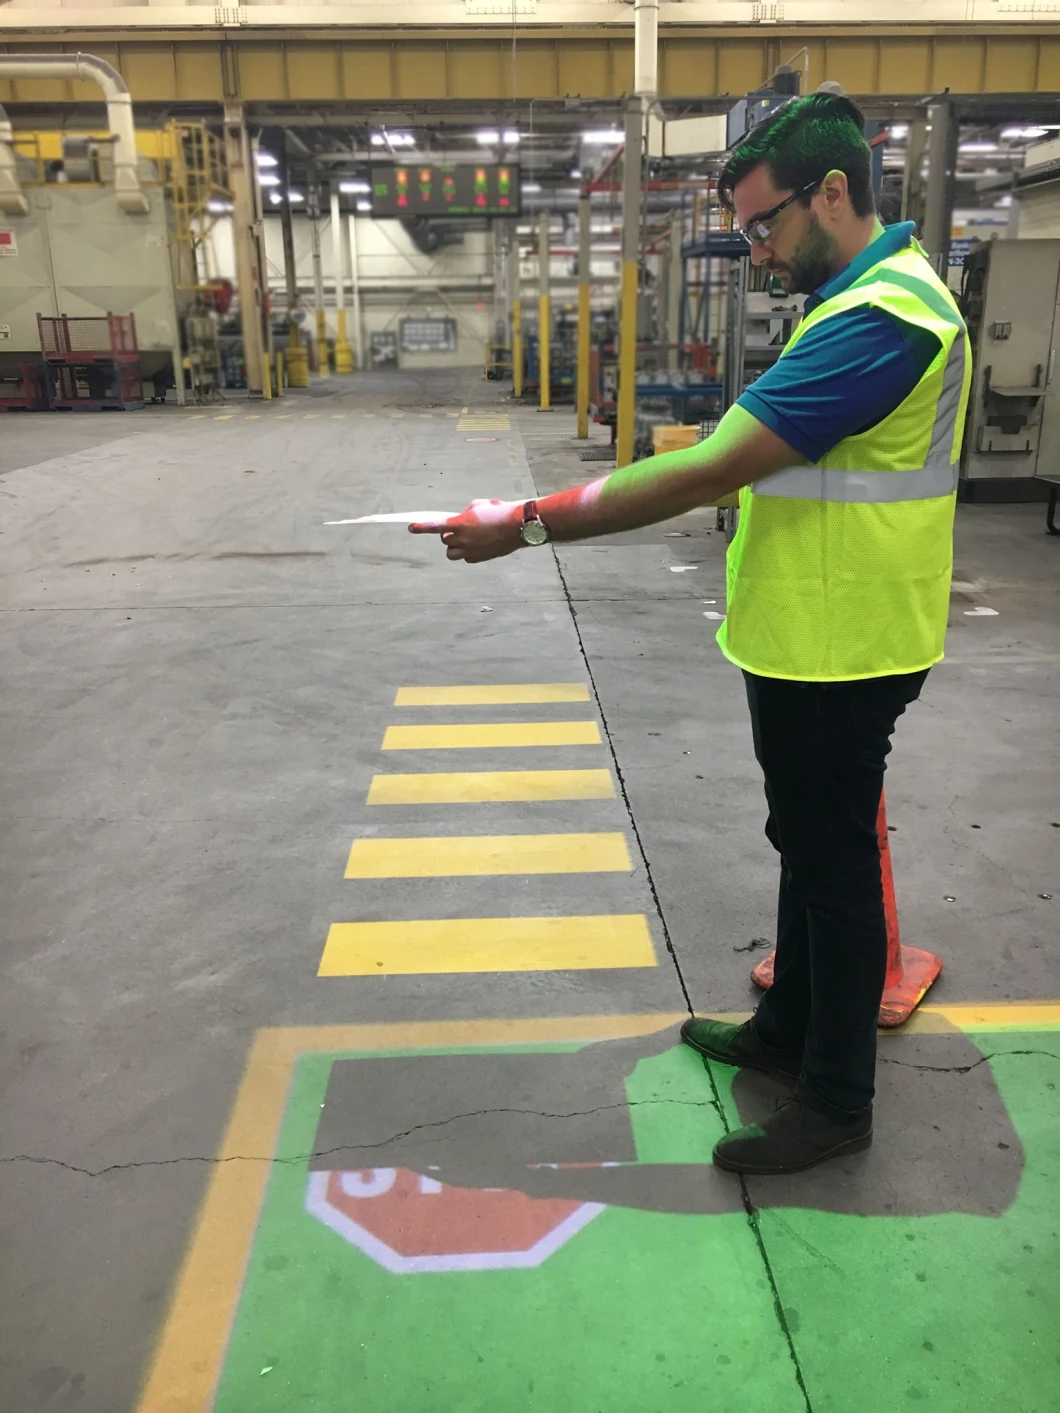 LED Floor Sign Projector Helps Alert Workers and Drivers in Warehouses, Manufacturing, and Other Industrial Operations